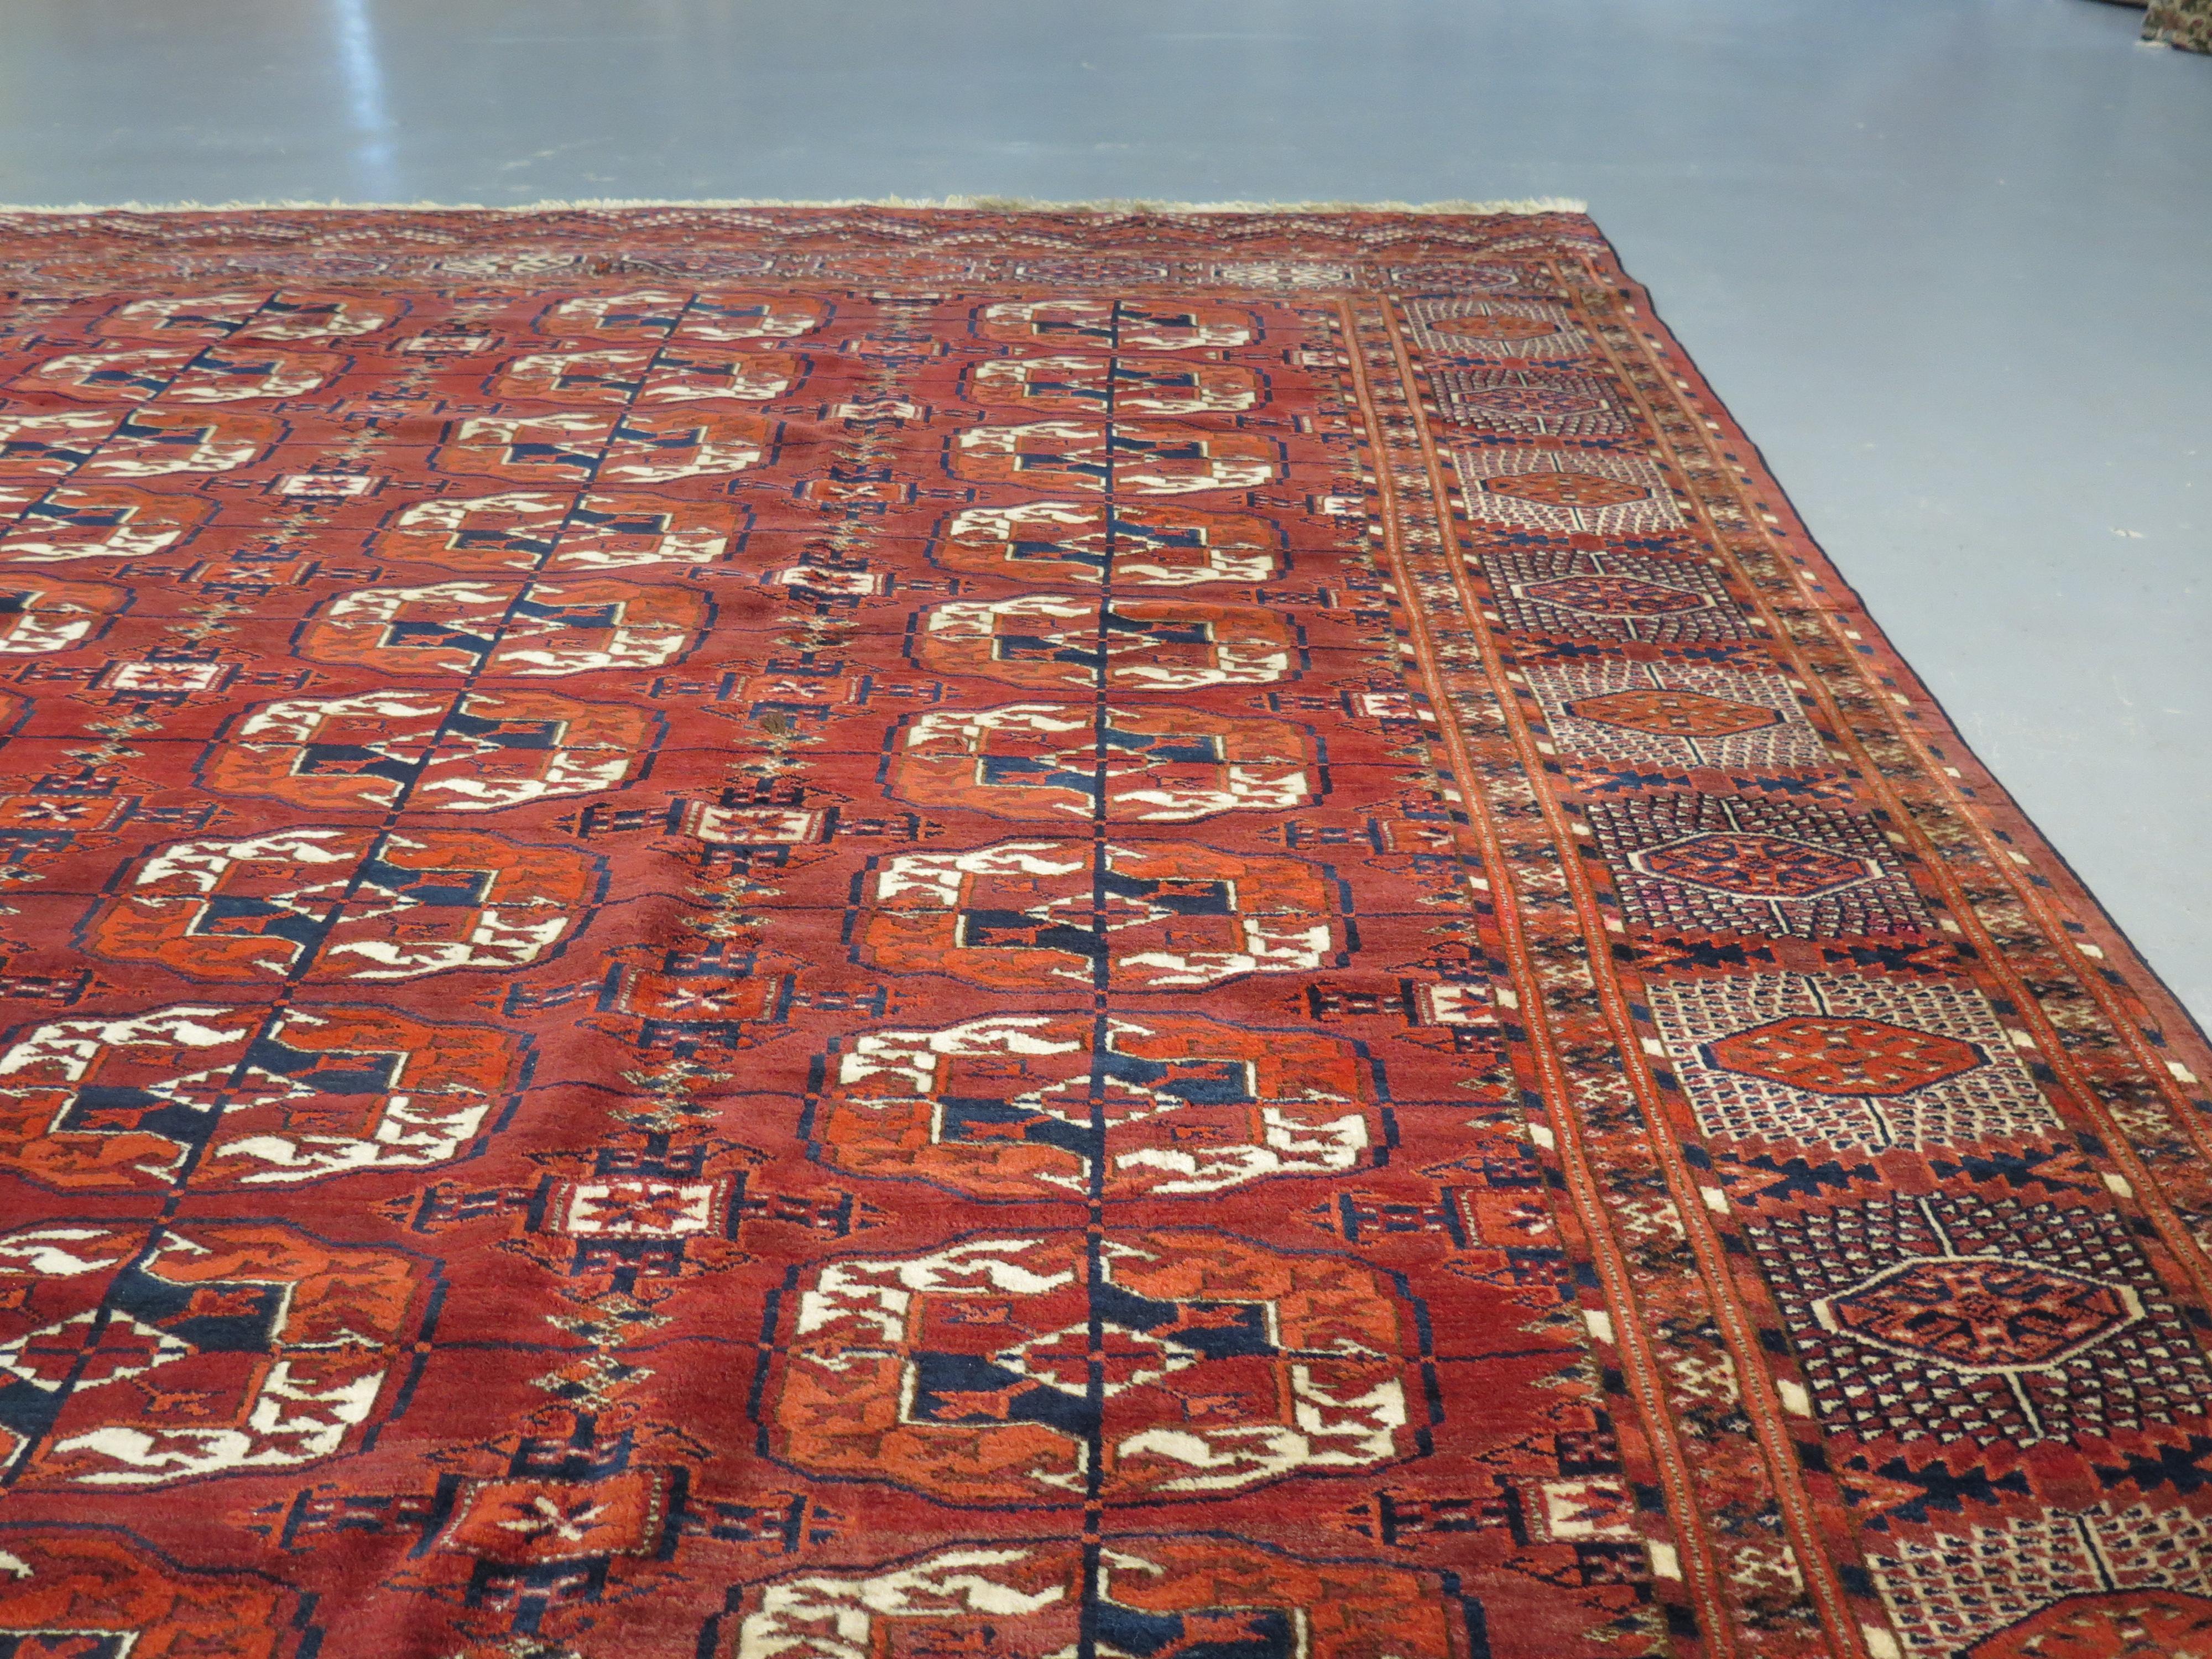 Tekke carpets are instantly recognizable for their distinctive stamped elephant foot patterns, even more so the early pieces, well known for their bold, visually arresting drawings.  Produced by the weavers of the Tekke tribes in Turkoman in Central